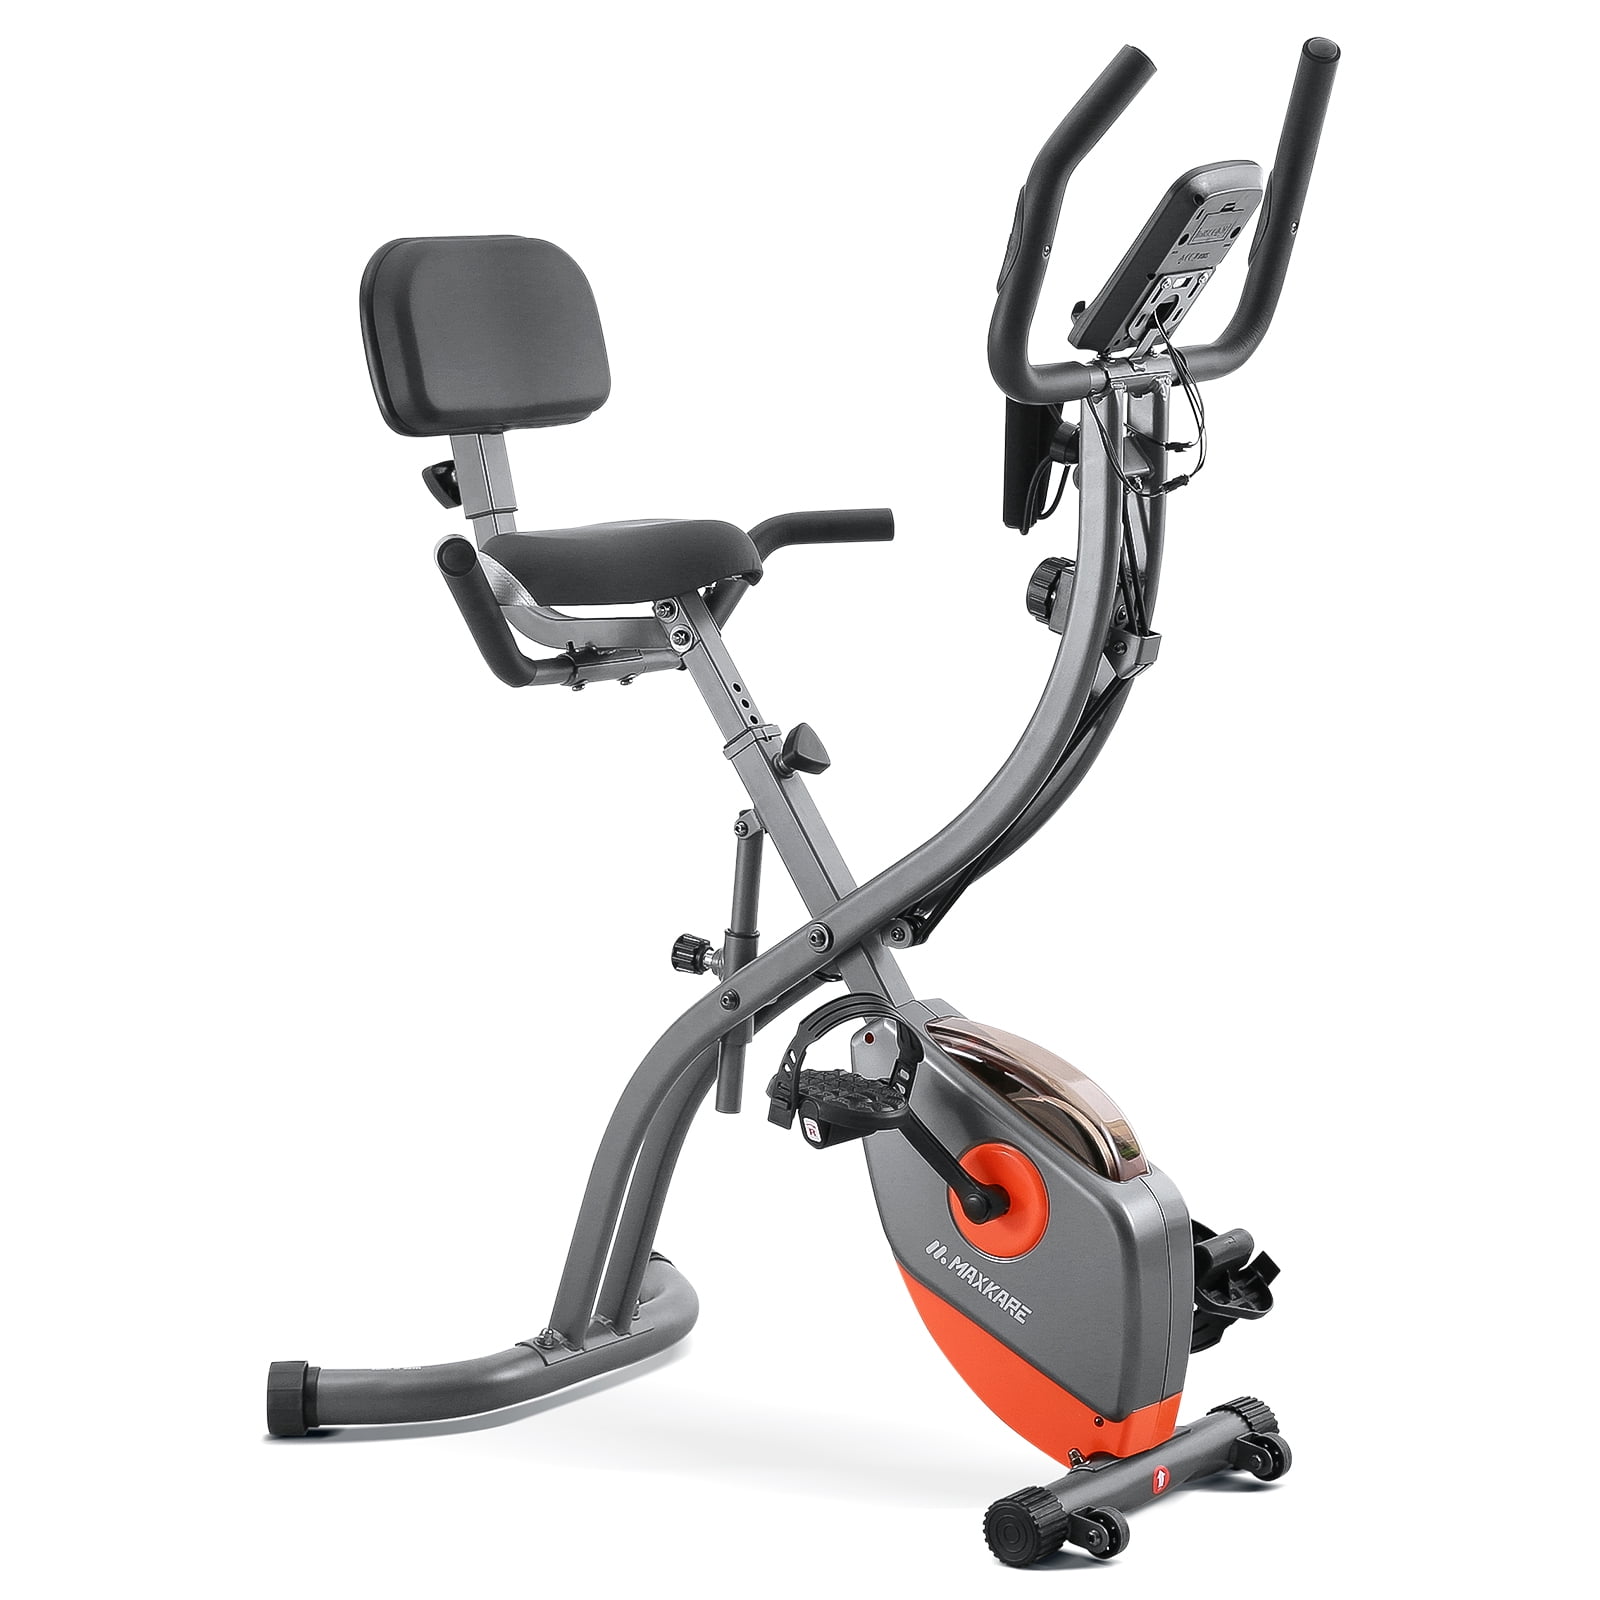 Details about   Indoor Cycling Bike-Stationary Exercise Bikes Comfortable_Adjustable Seat_49lbs 